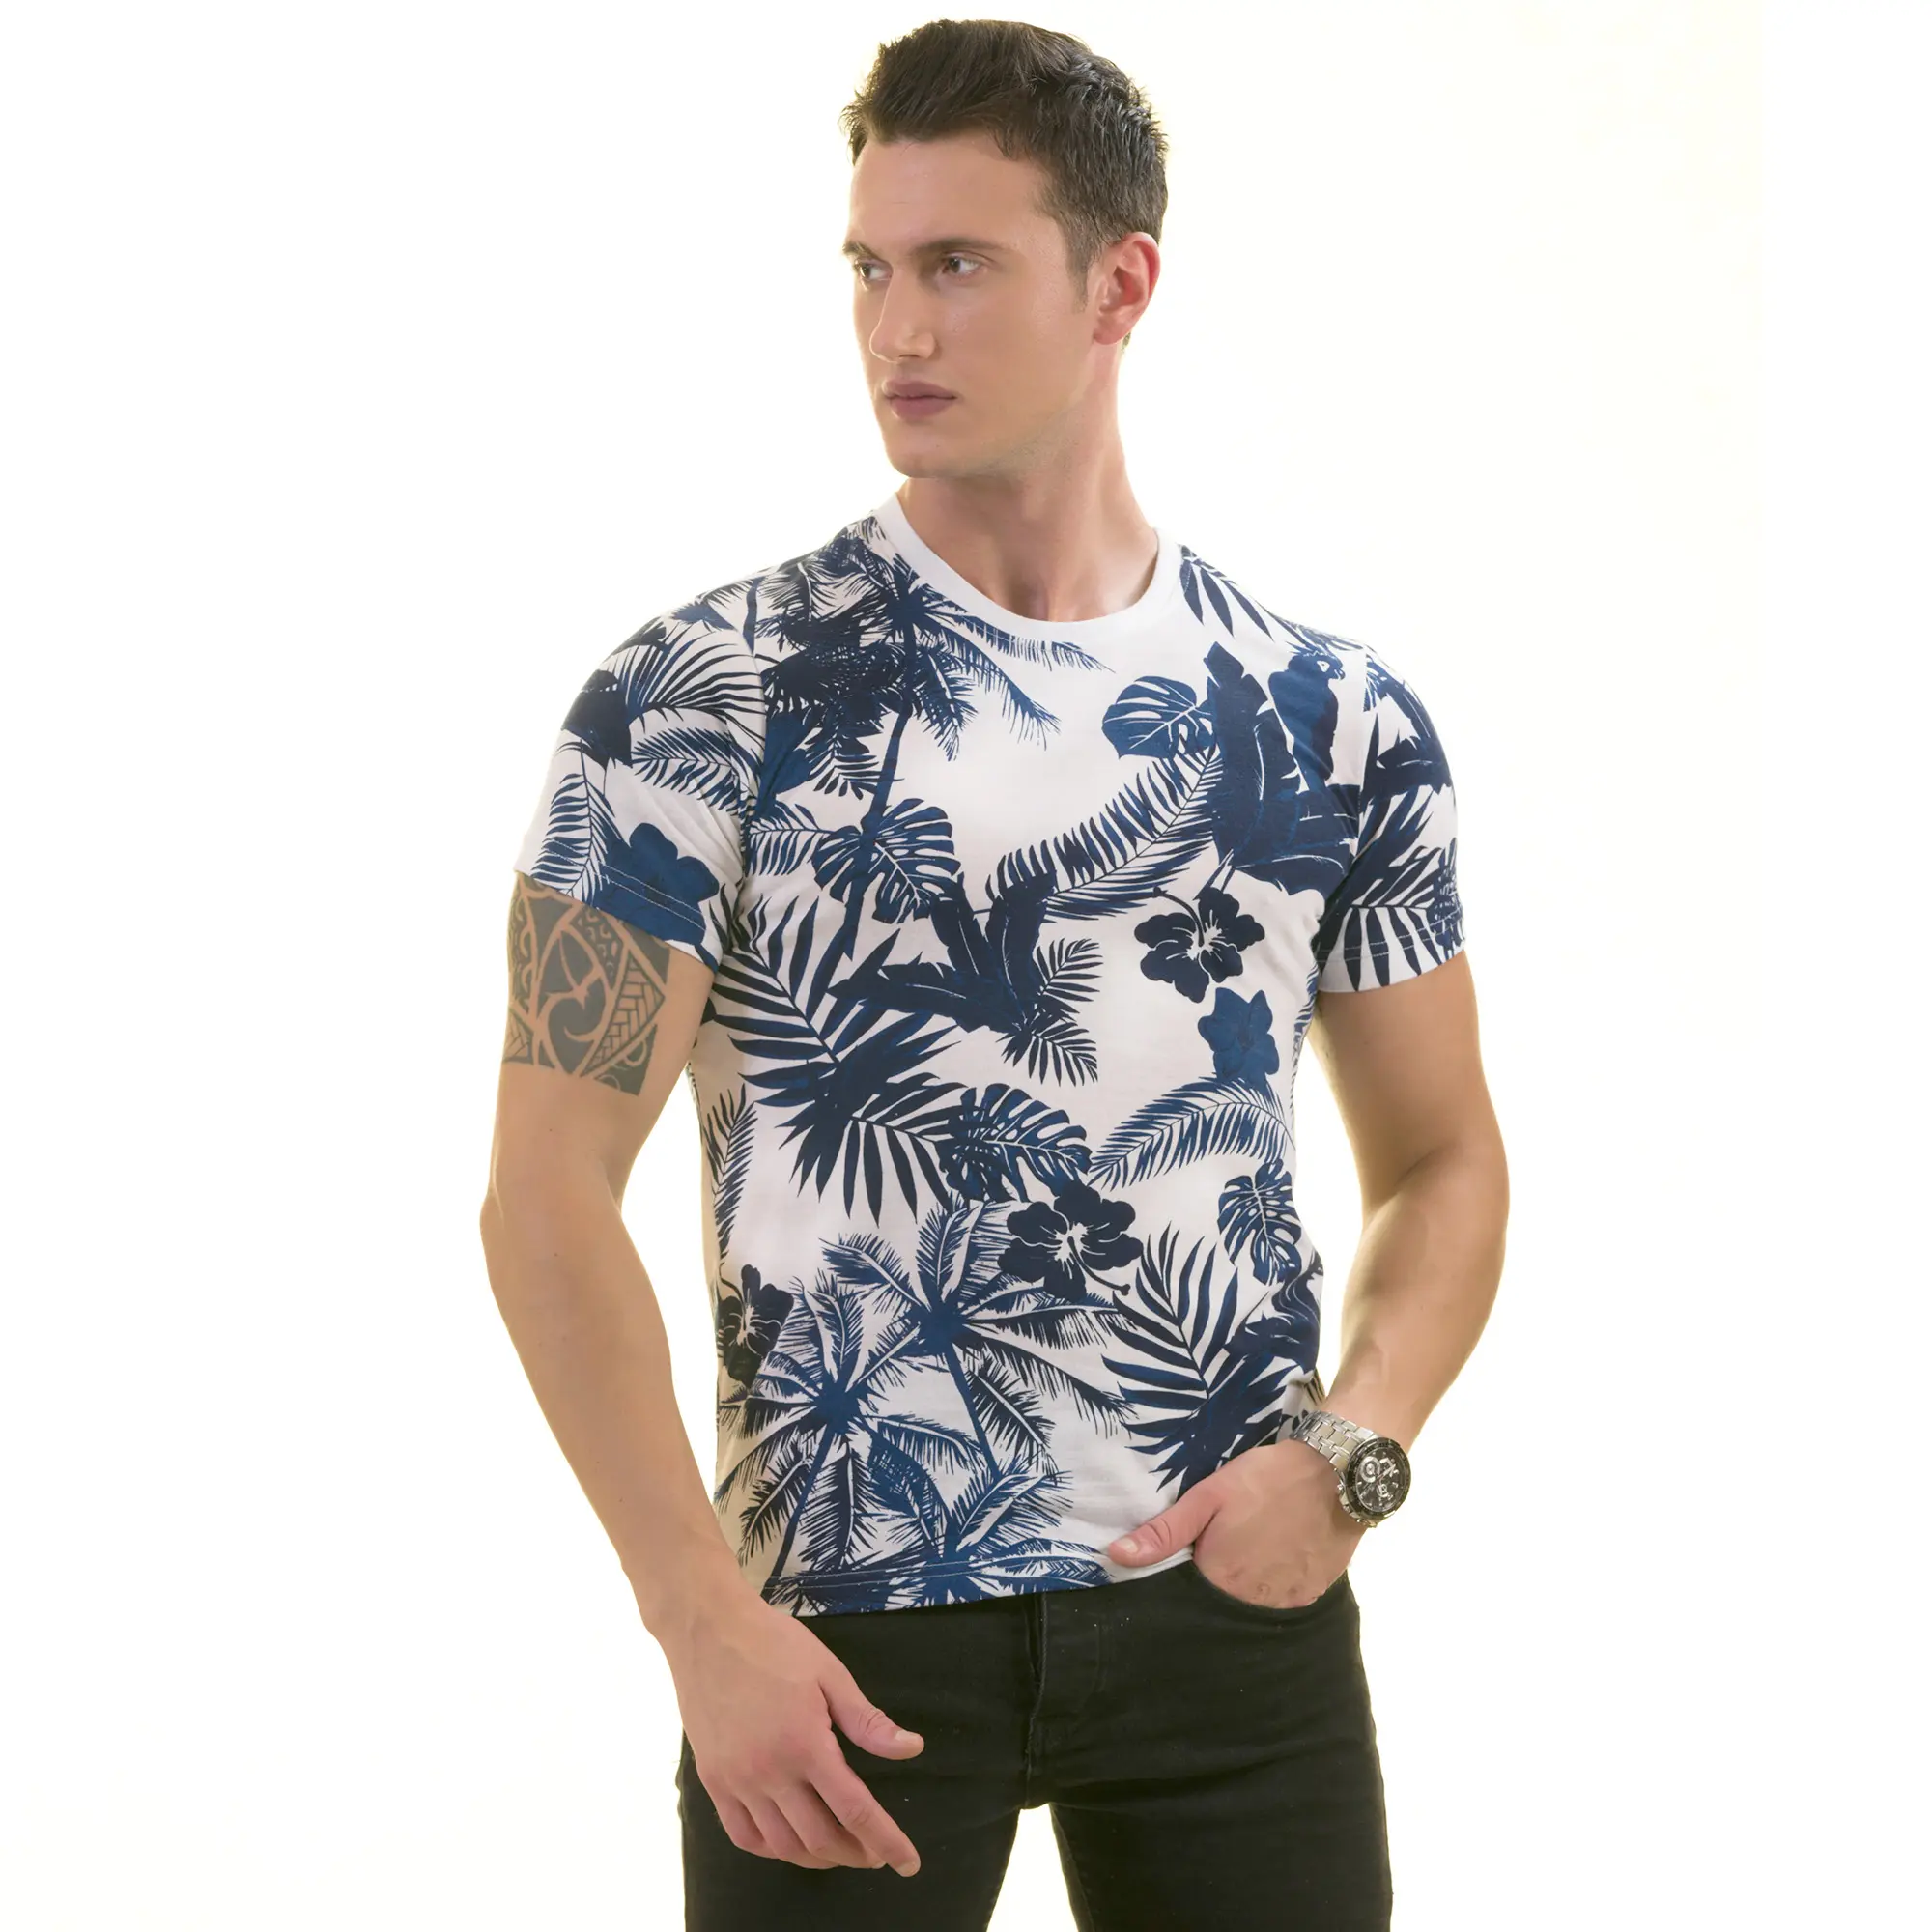 quality brand T shirt Men's Fashion Print Color Matching Casual Slim Fit Short Sleeve T-Shirt made in turkey